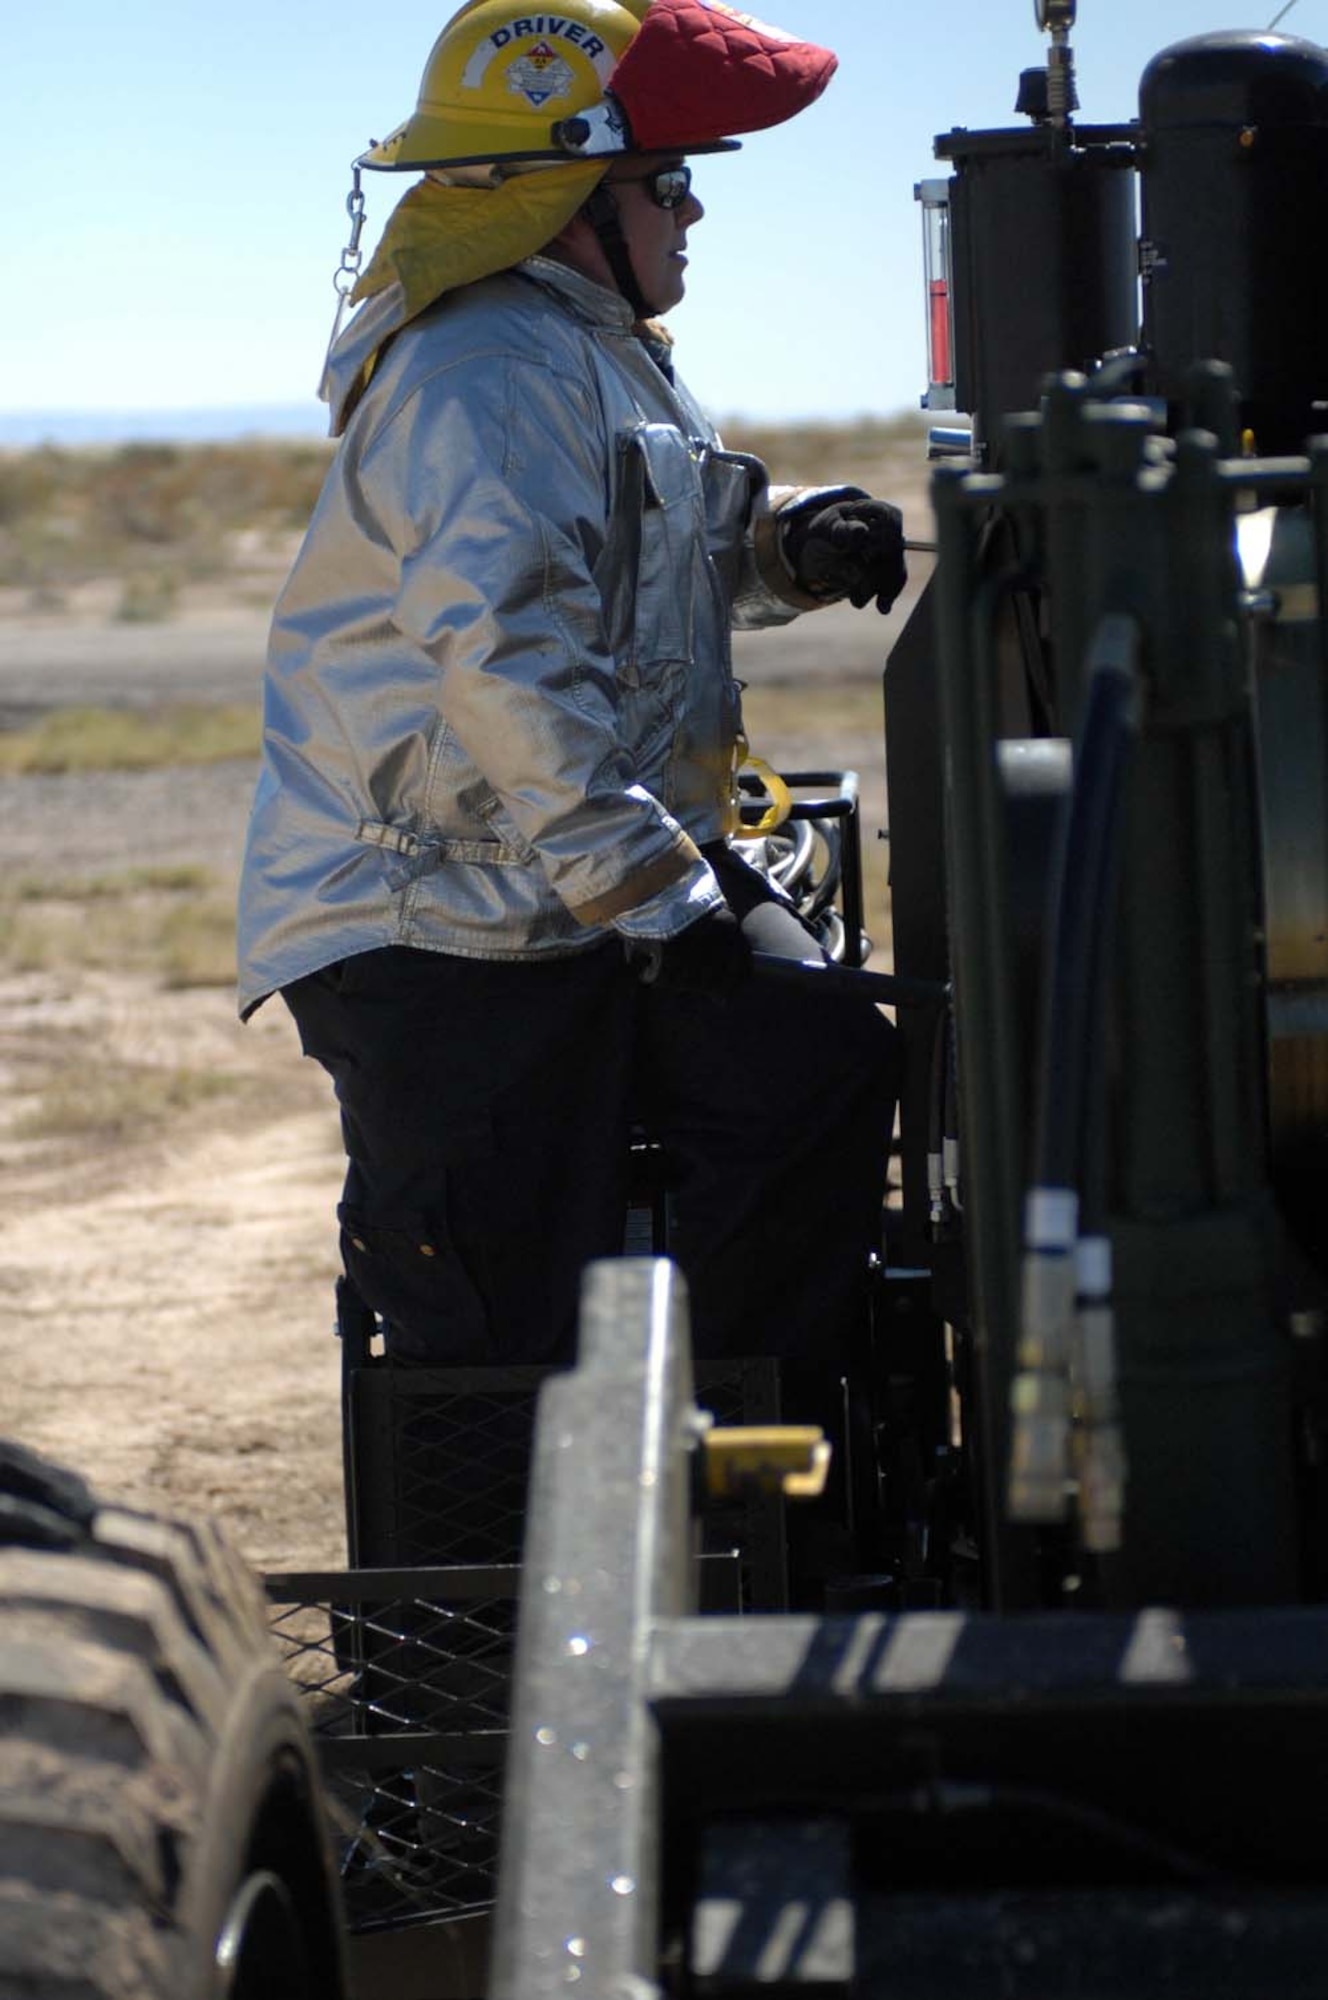 Mr. Keven Mickle, 49th Civil Engineer Squadron firefighter, starts the engine of rhe new mobility aircraft arresting system at Holloman Air Force Base, N.M., before its certification October 23. (U.S. Air Force photo/ Staff Sgt. Terri Barriere)